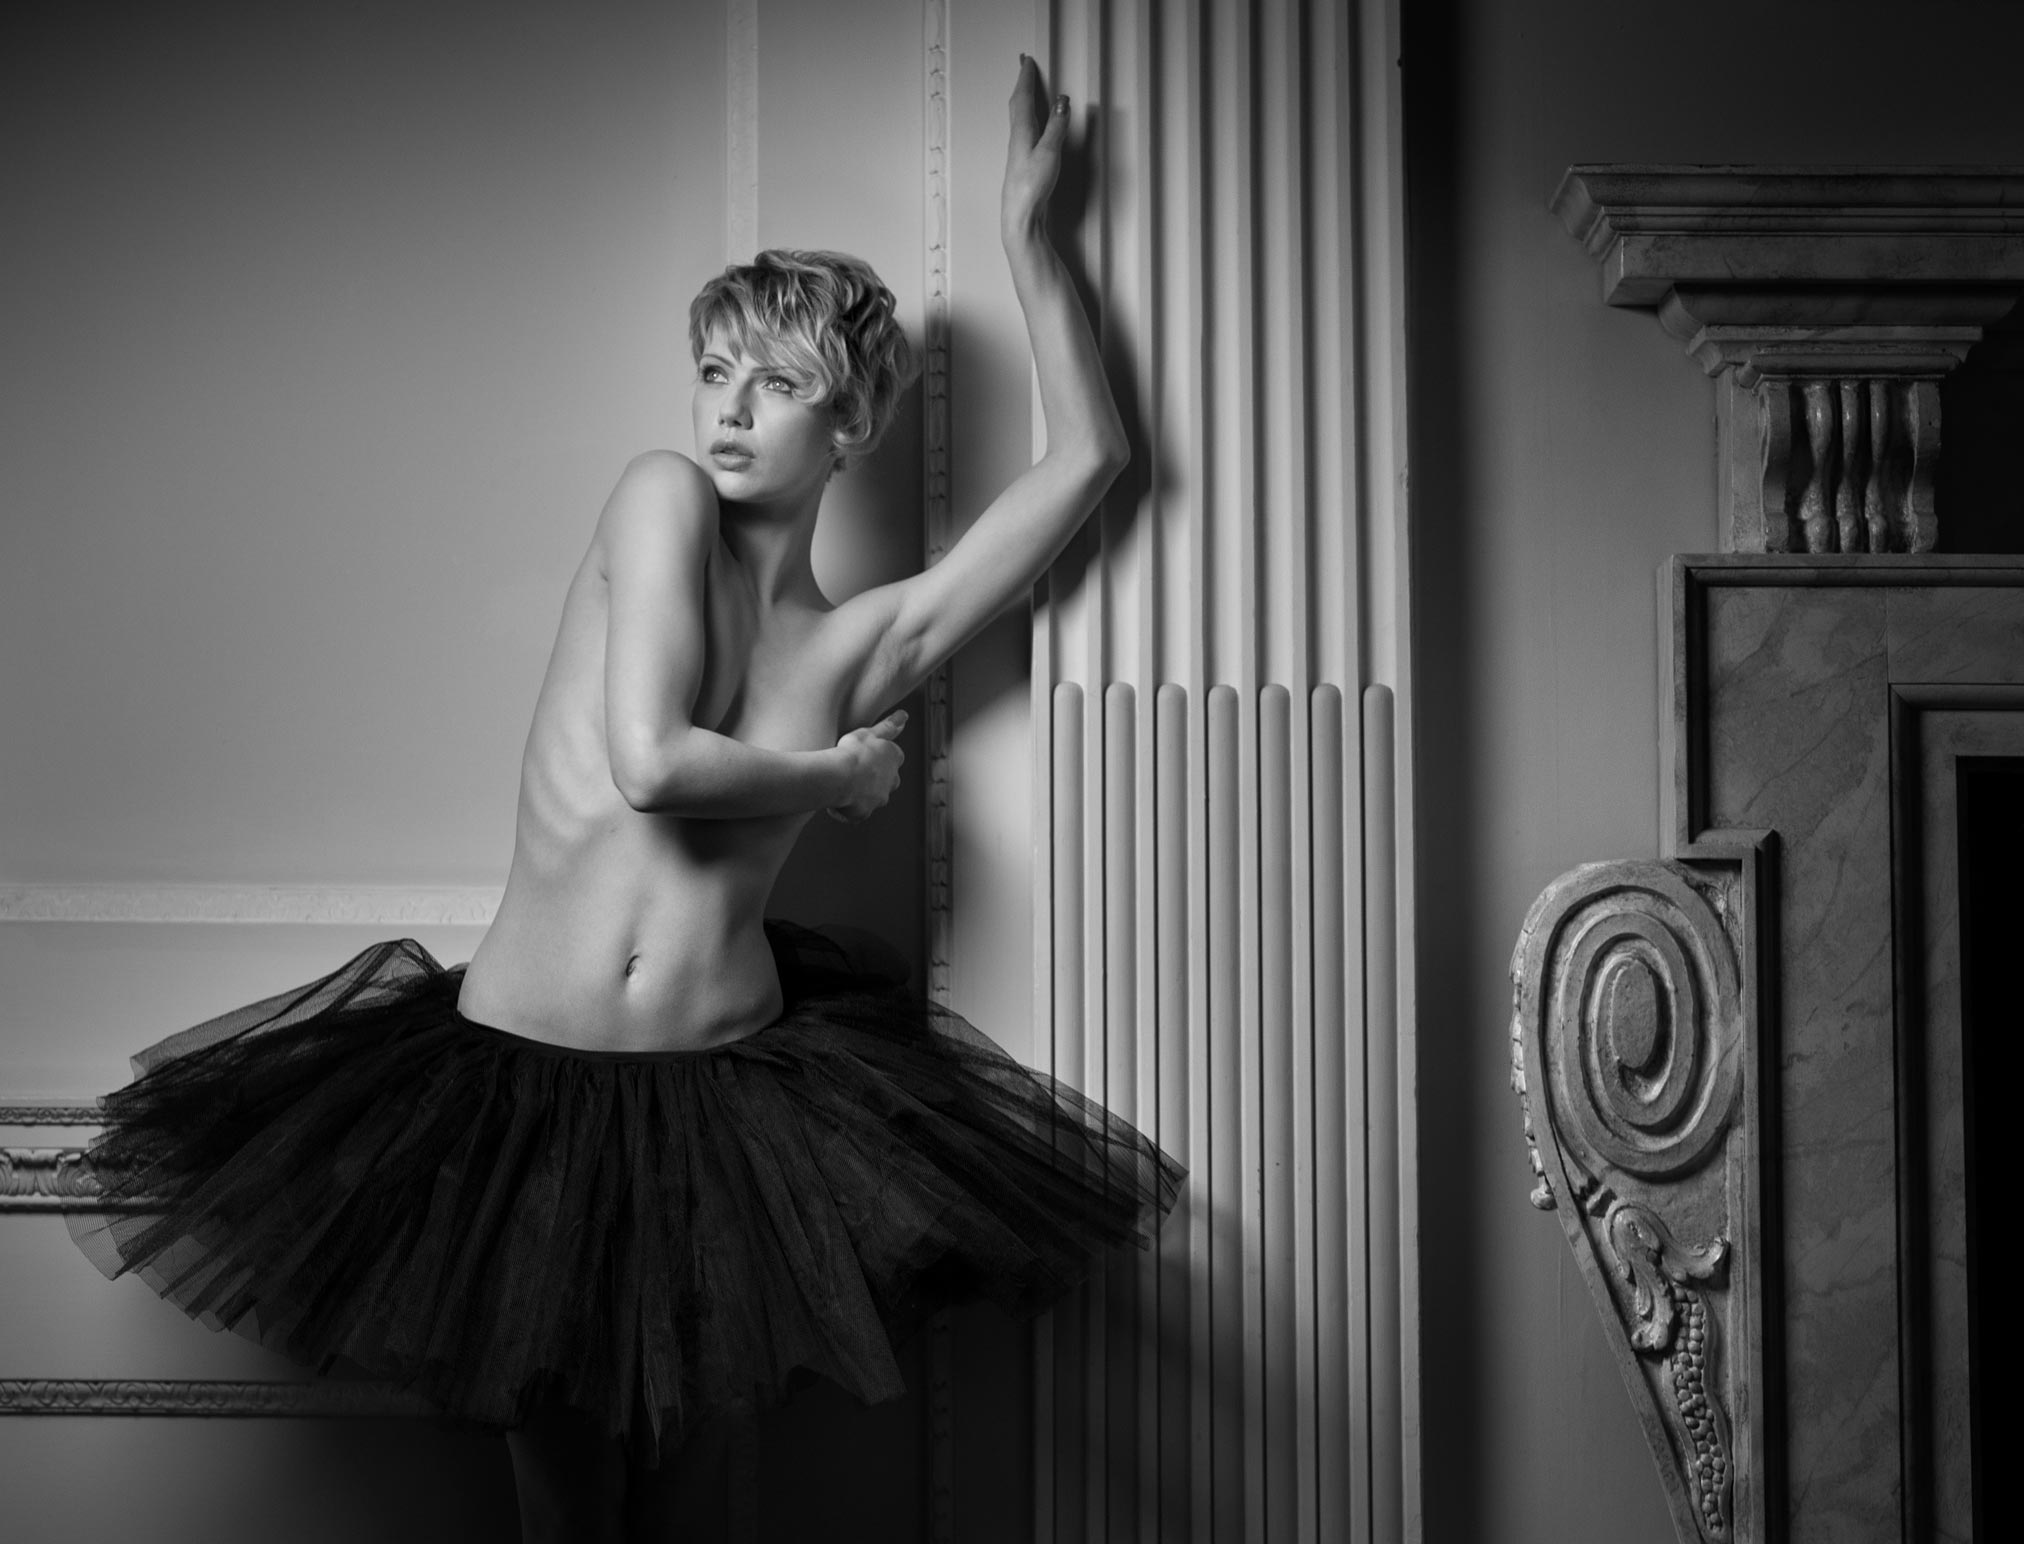 Katy in a tutu in a fabulous old house